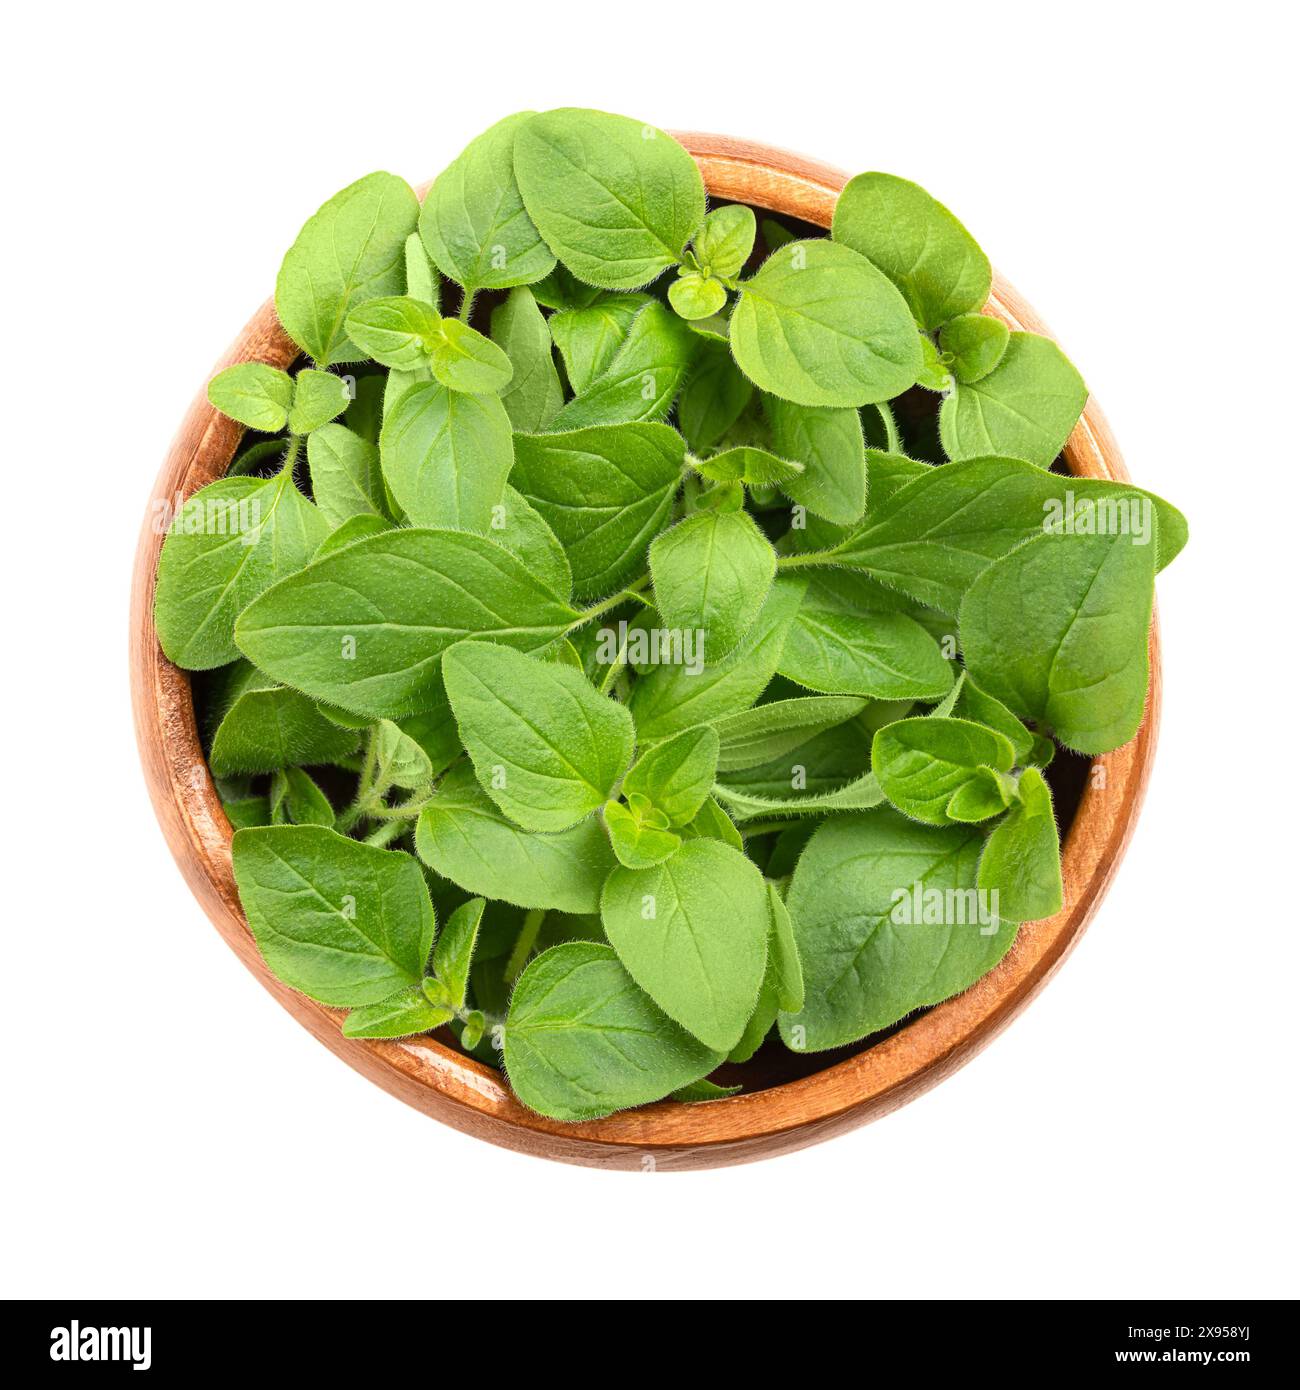 Fresh oregano twigs in a wooden bowl. Origanum vulgare, sometimes wild marjoram, a culinary herb and the staple herb of Italian cuisine. Stock Photo